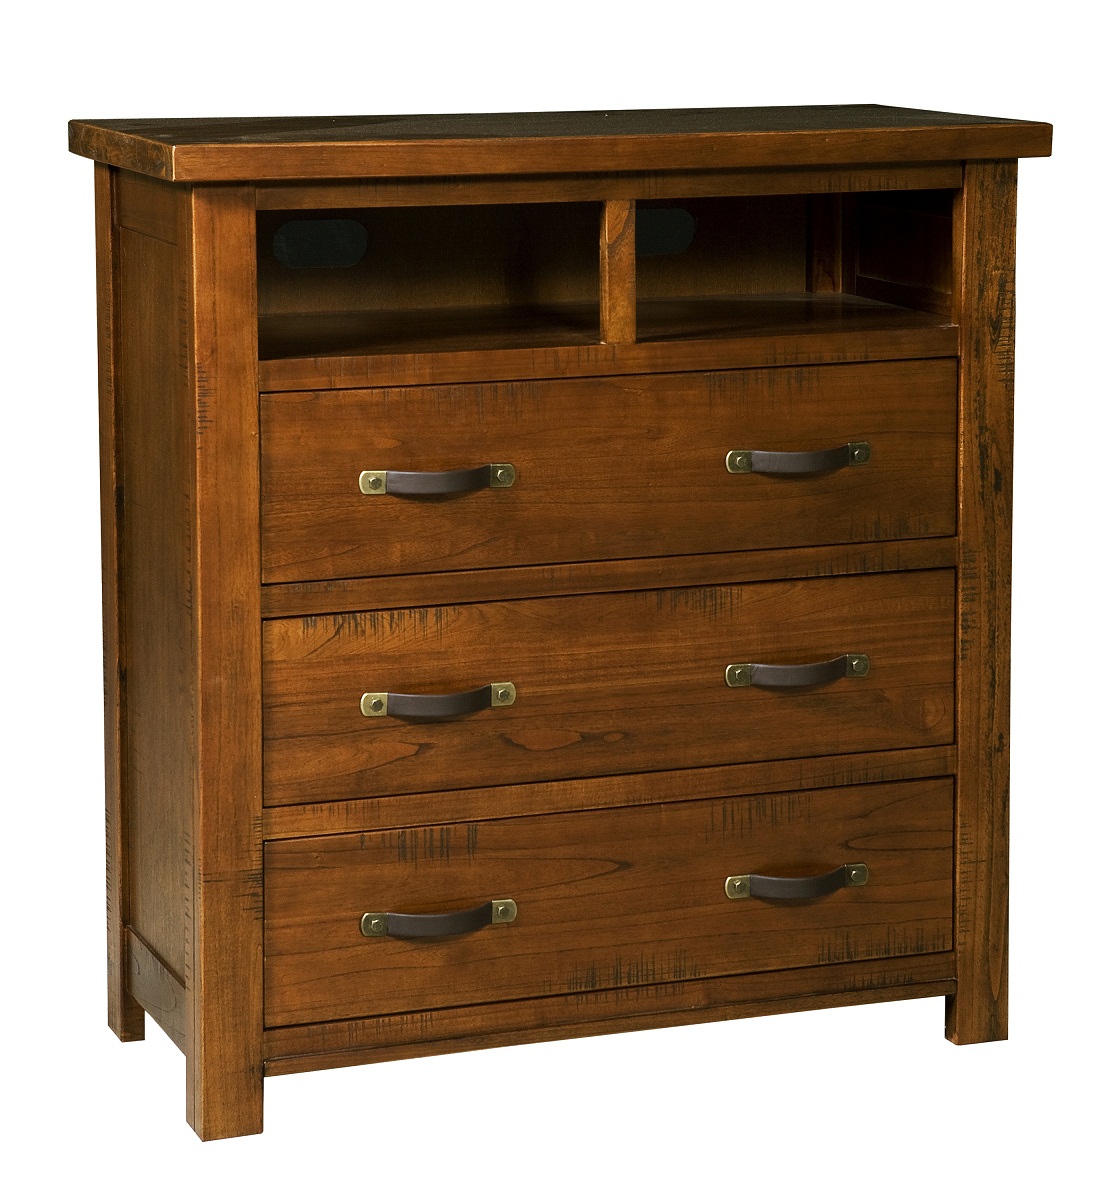 Hillsdale Outback 6 Drawer Chest - Distressed Chestnut